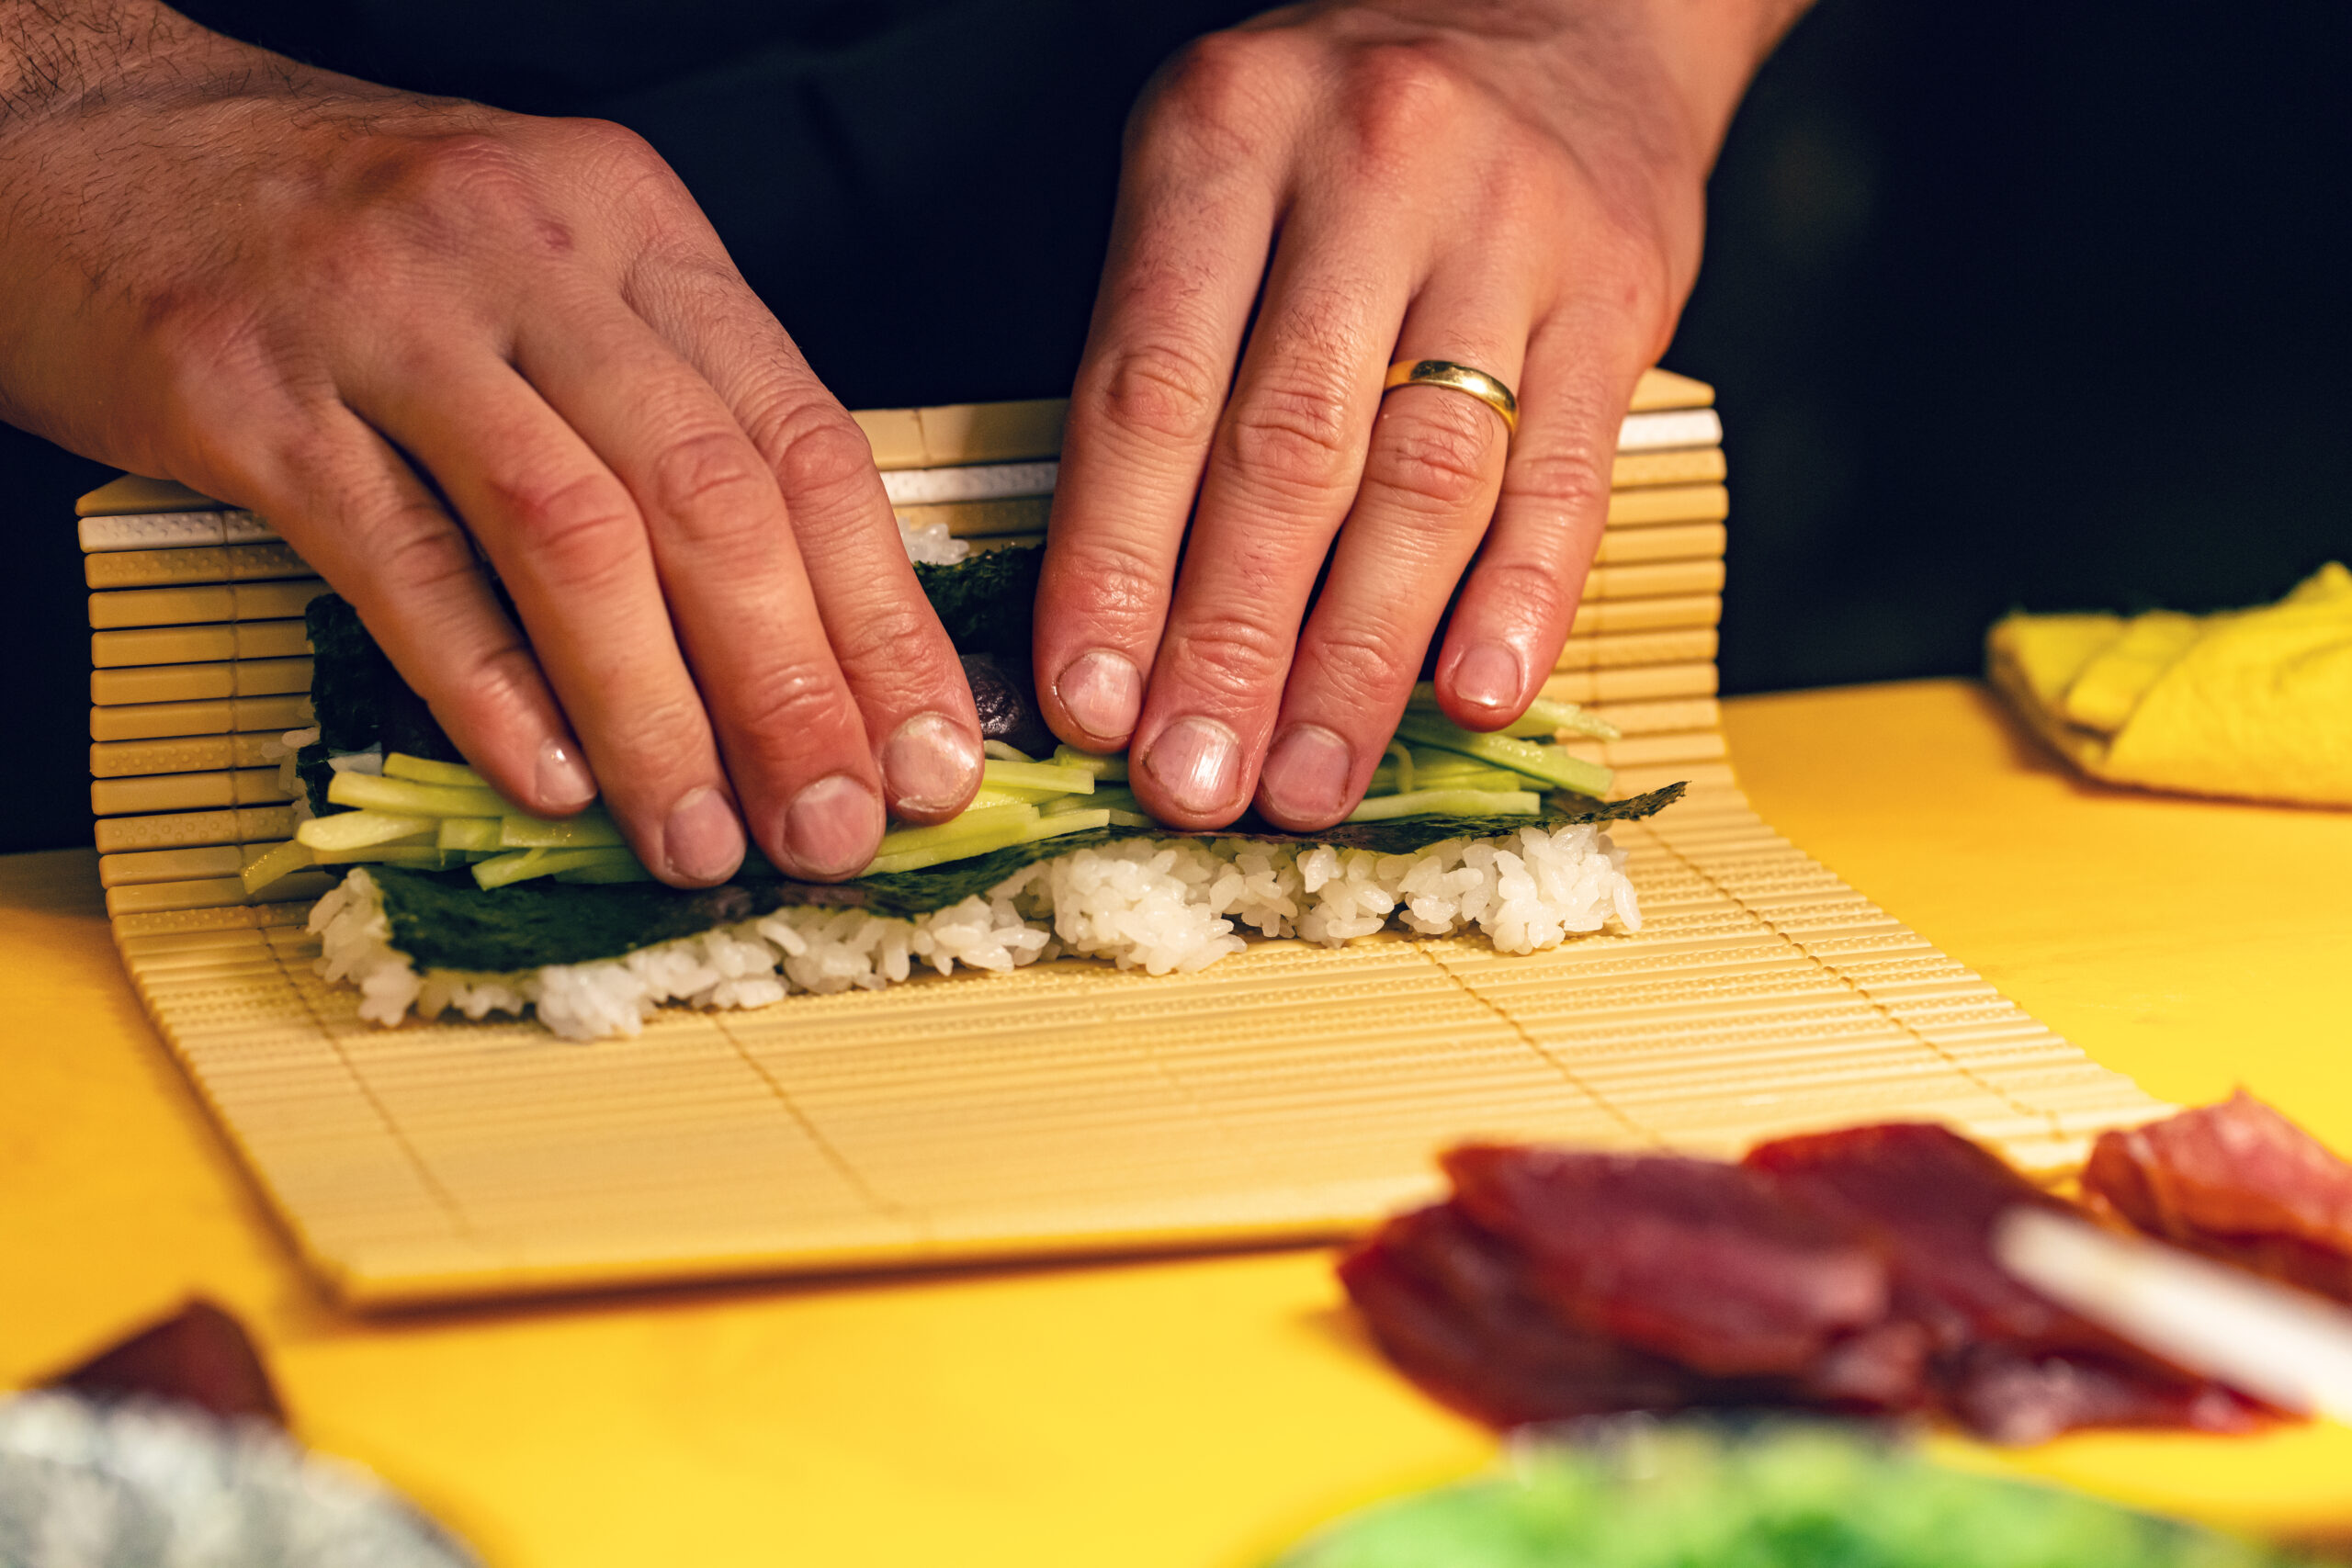 Chef hands preparing japanese food, chef making sushi, preparing sushi roll nice touch